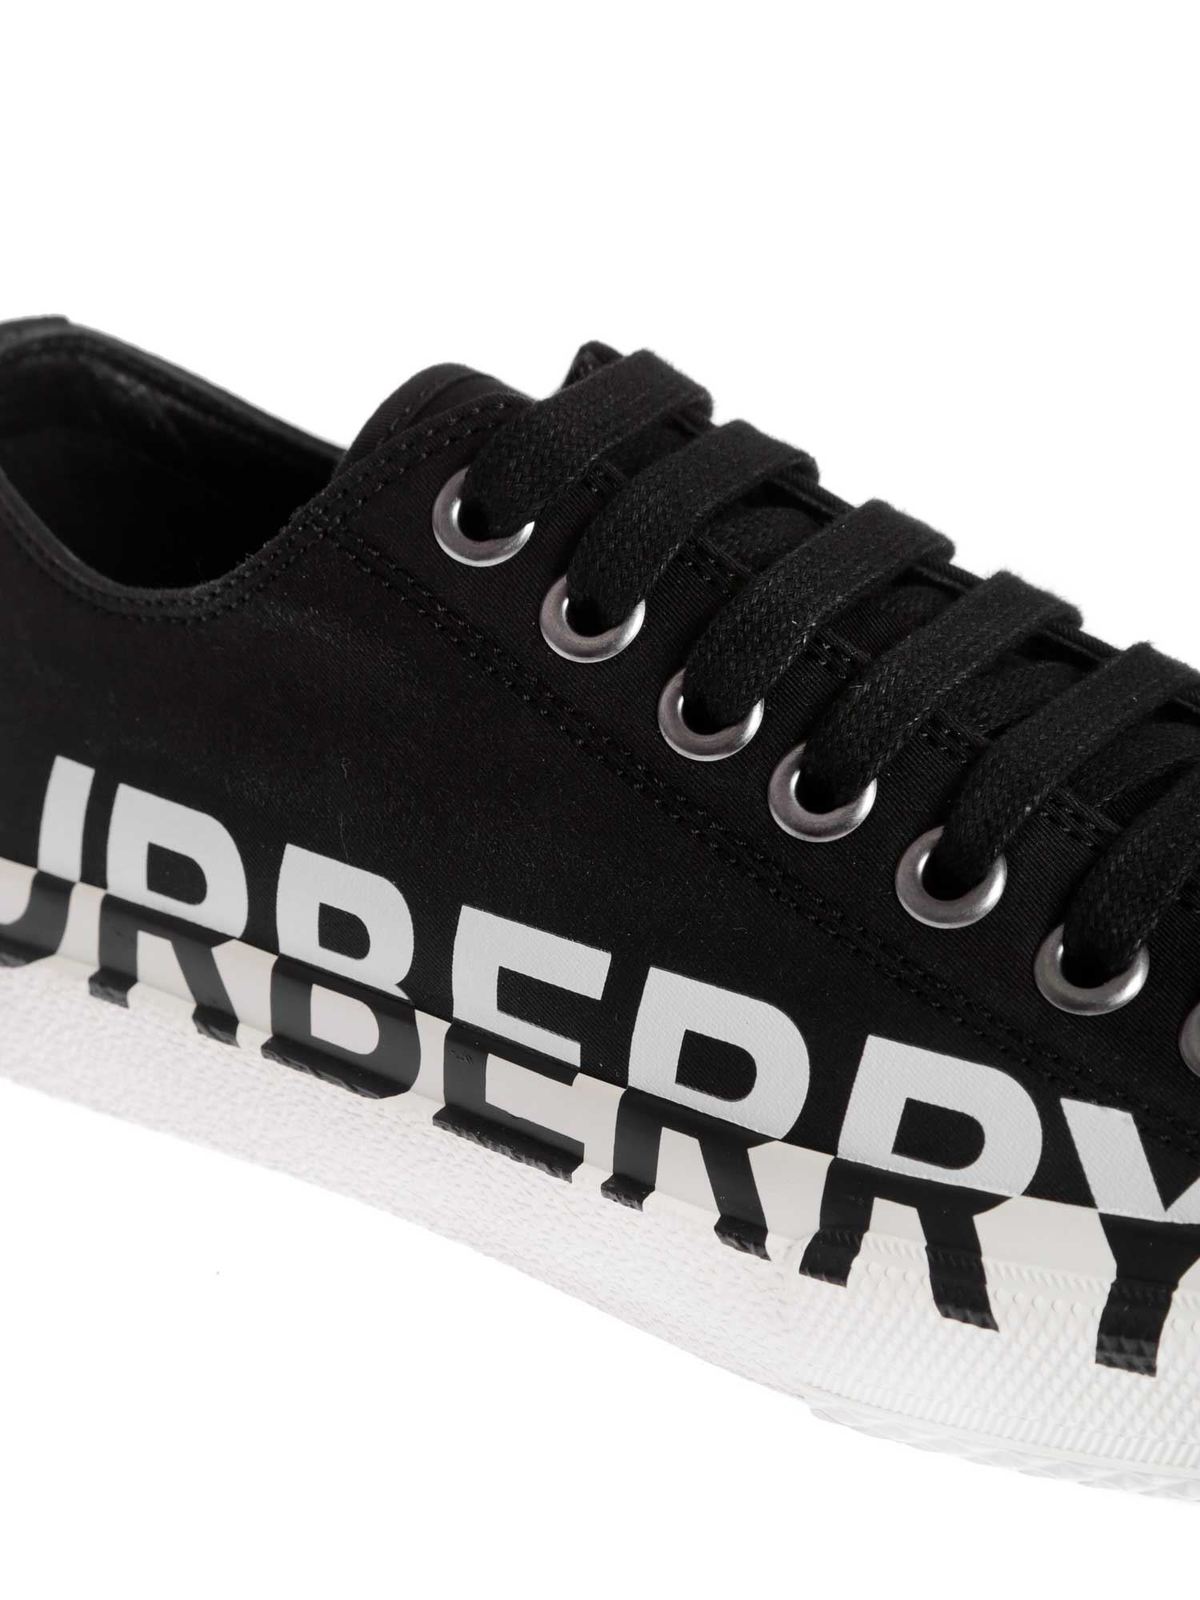 Trainers Burberry - Larkhall sneakers in black - 8018270 